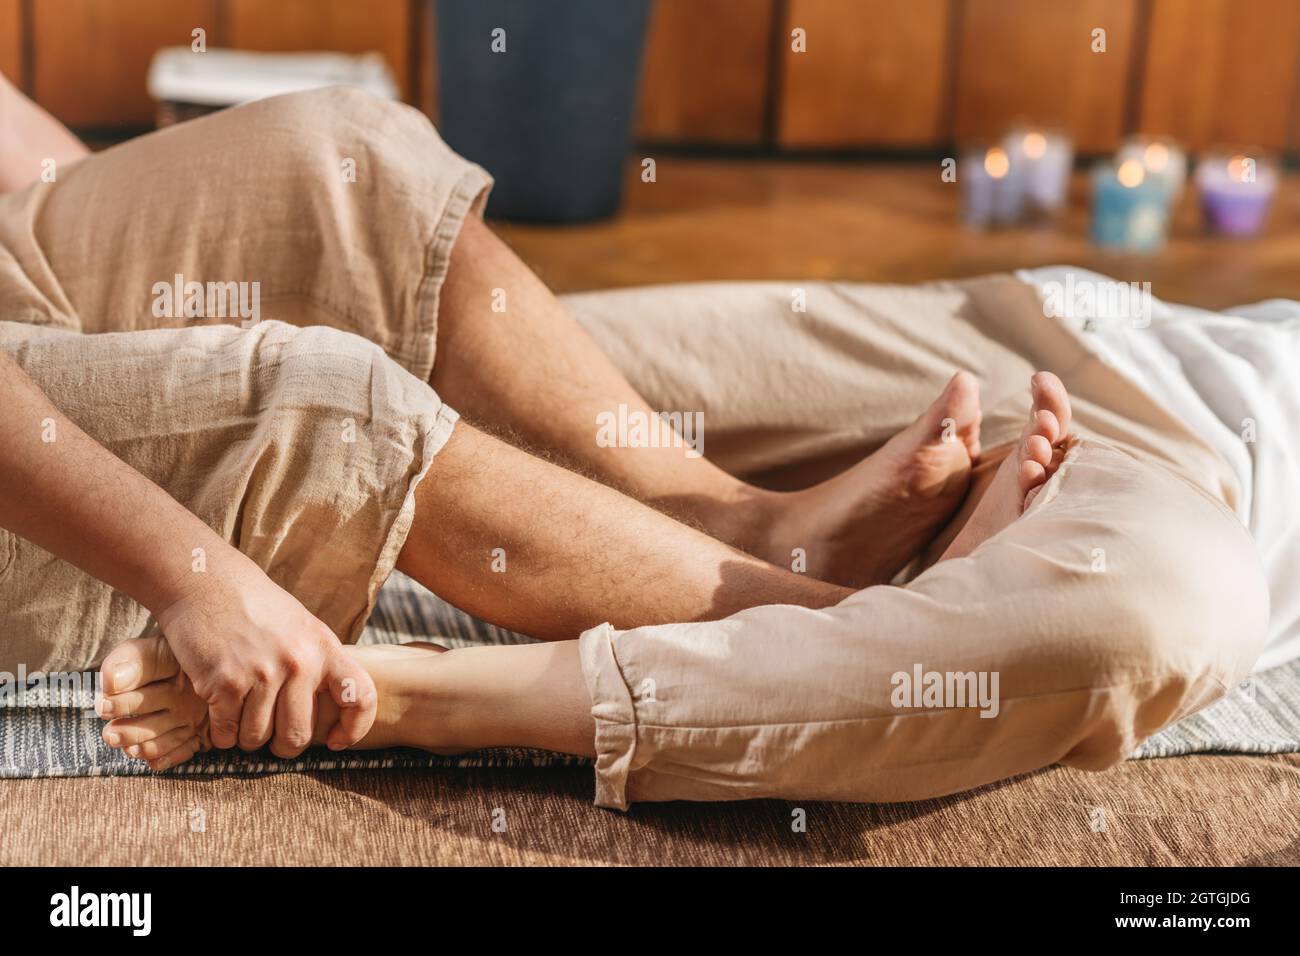 Thai Full Body Massage - Hip Stretching. Thai Massage Male Practitioner  Pressing The Female Client Stock Photo - Alamy